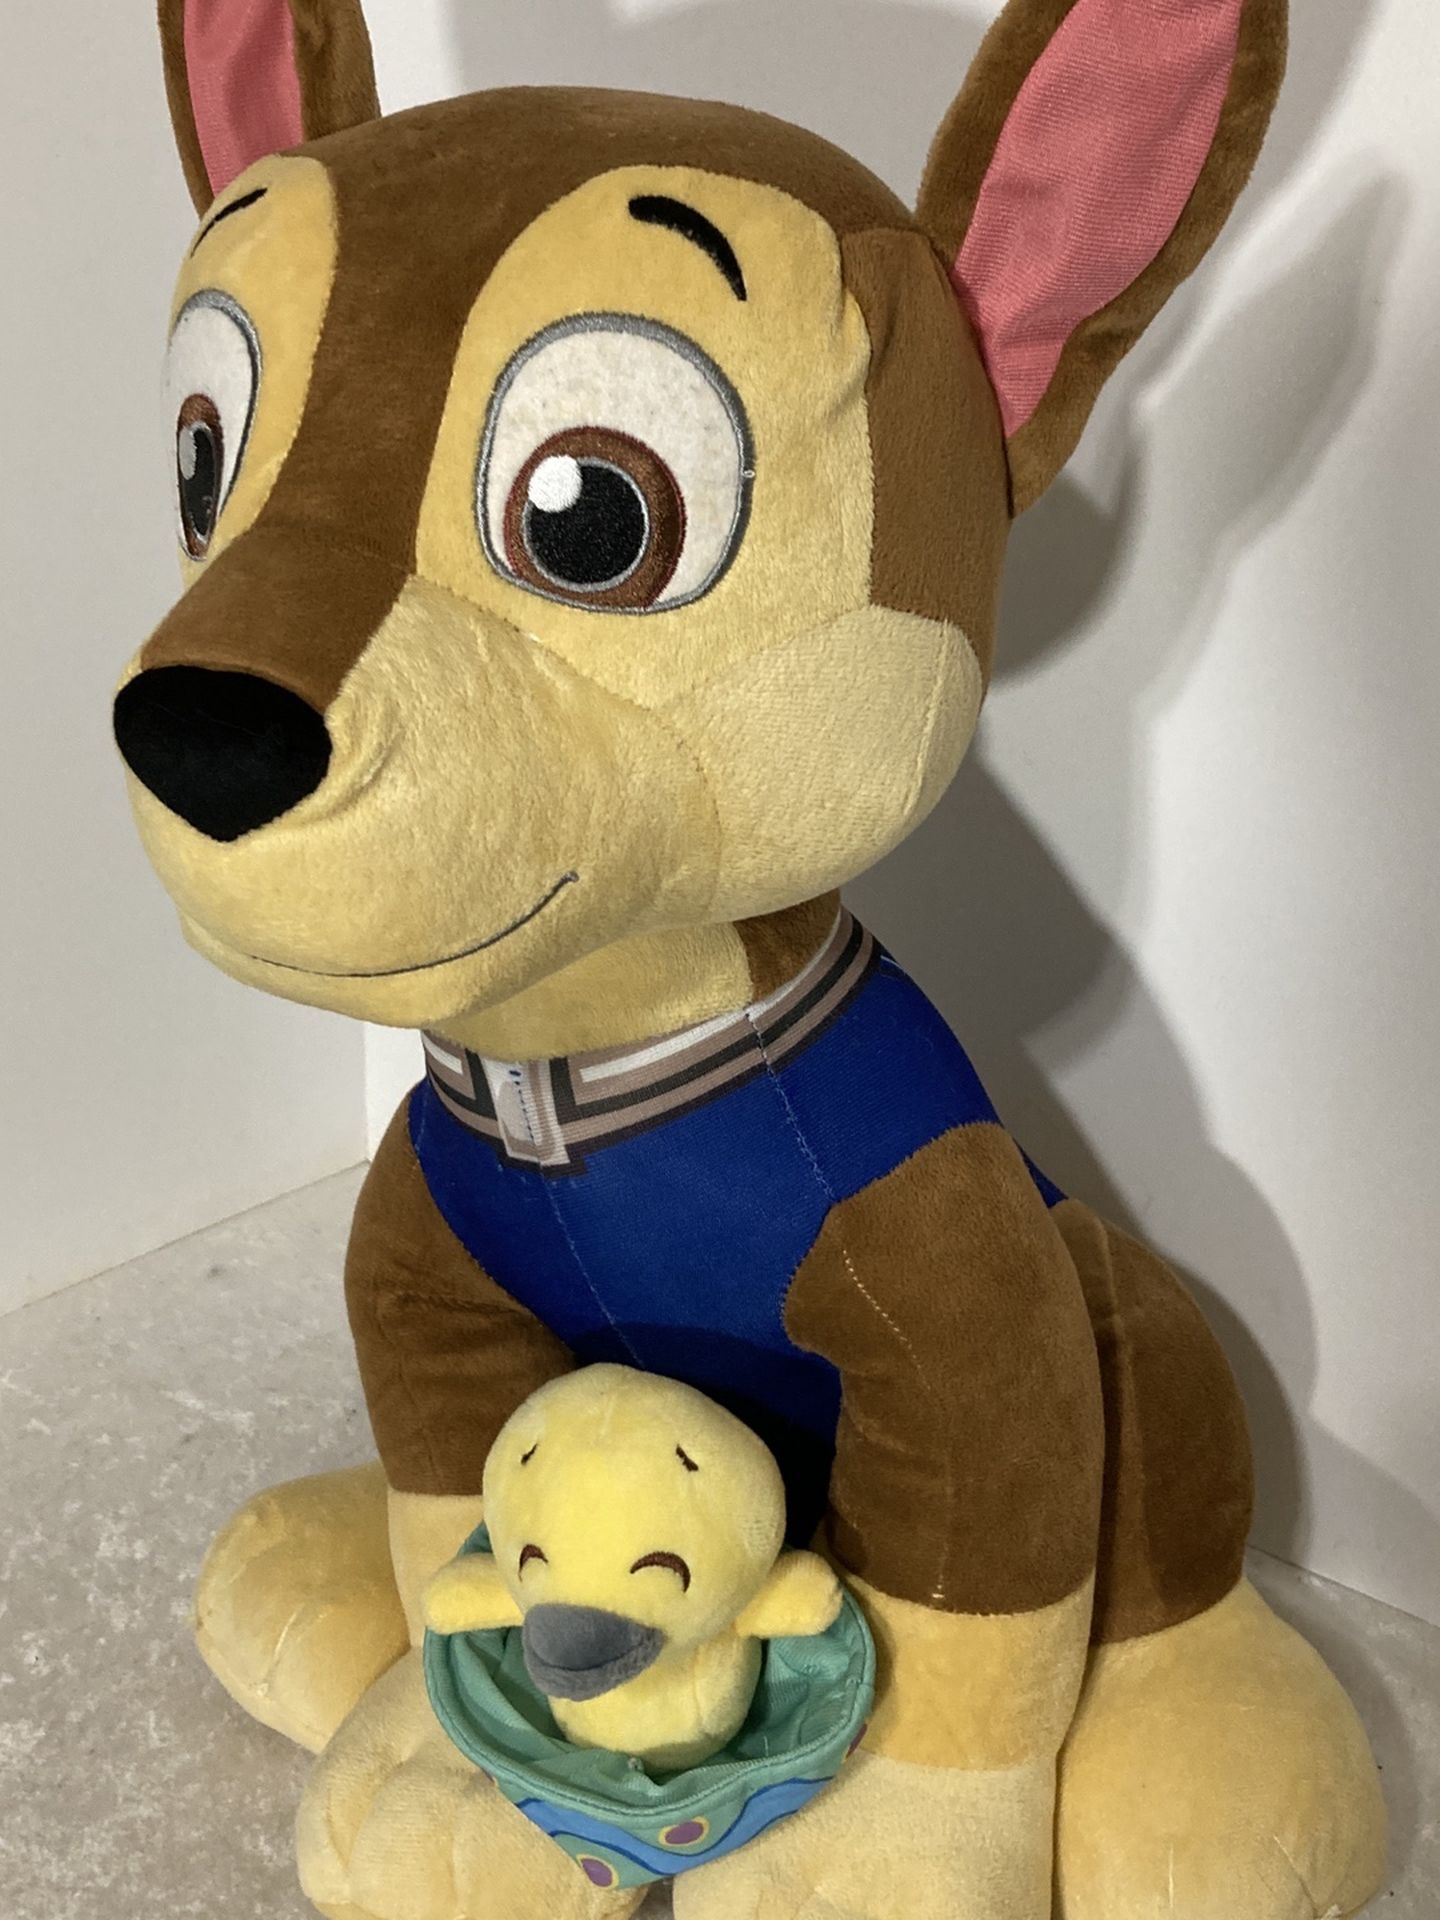 Easter-GIANT Chase from Paw Patrol W/ Basket & Chick Plush - 21 Inches tall!